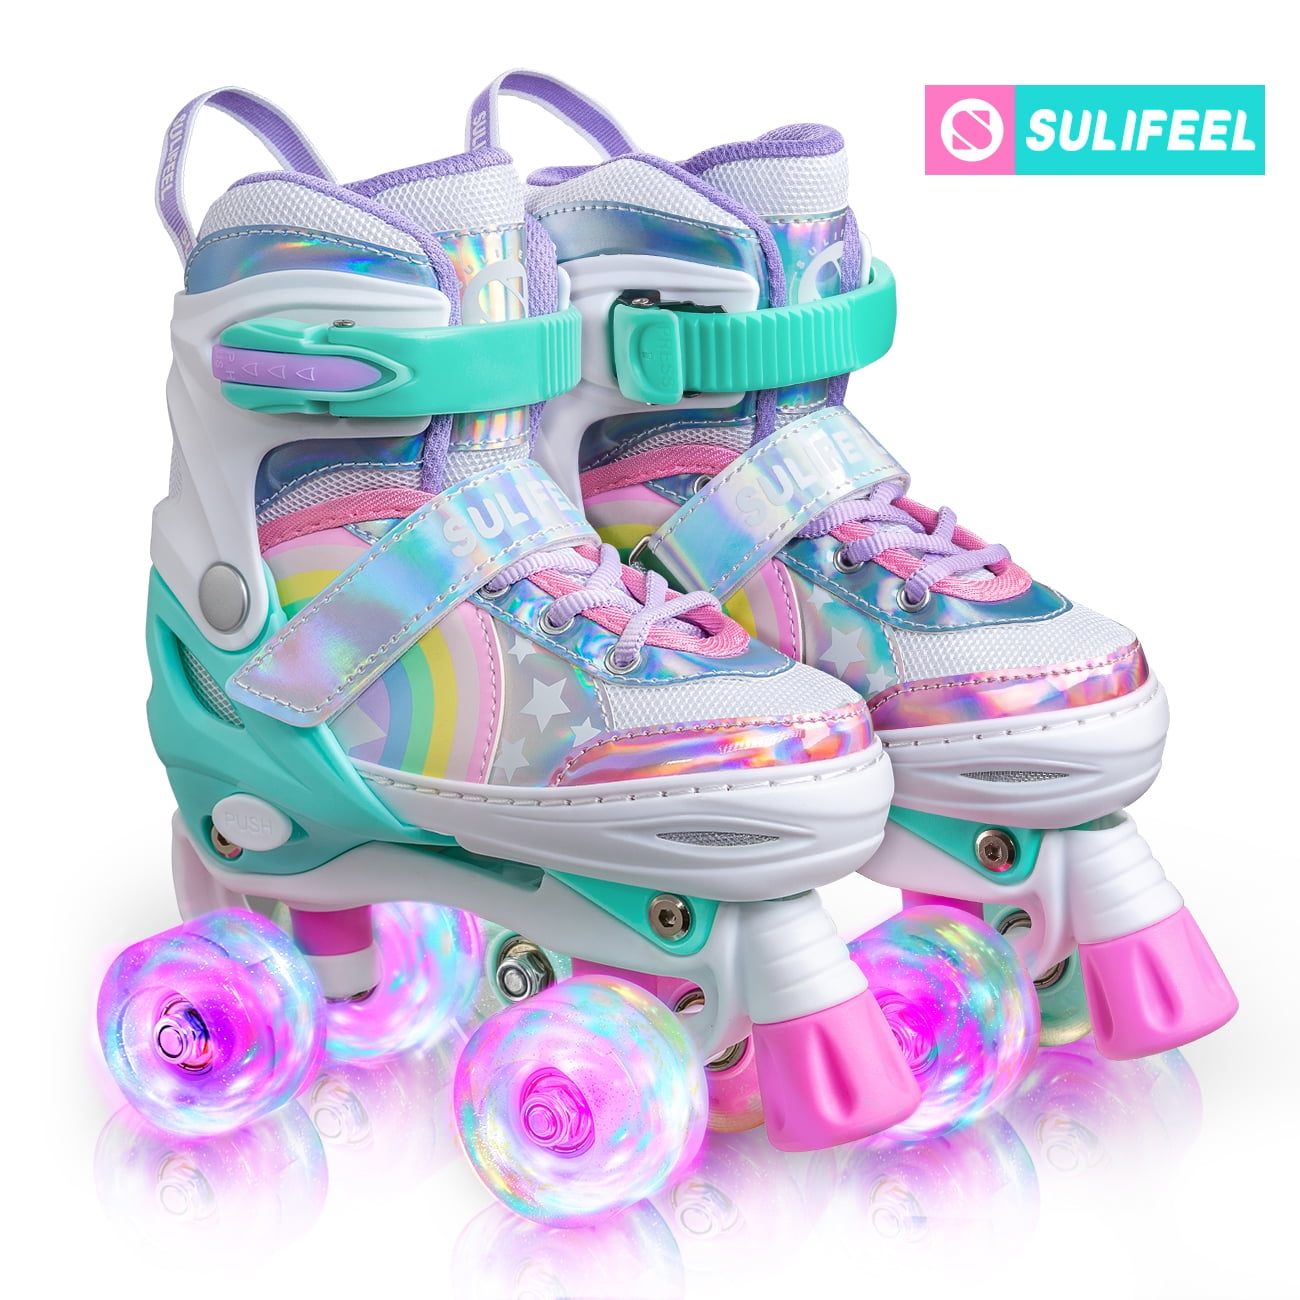 Adjustable Inline Skates With 100 MM P.U Wheels For All Age Groups In Multicolor 